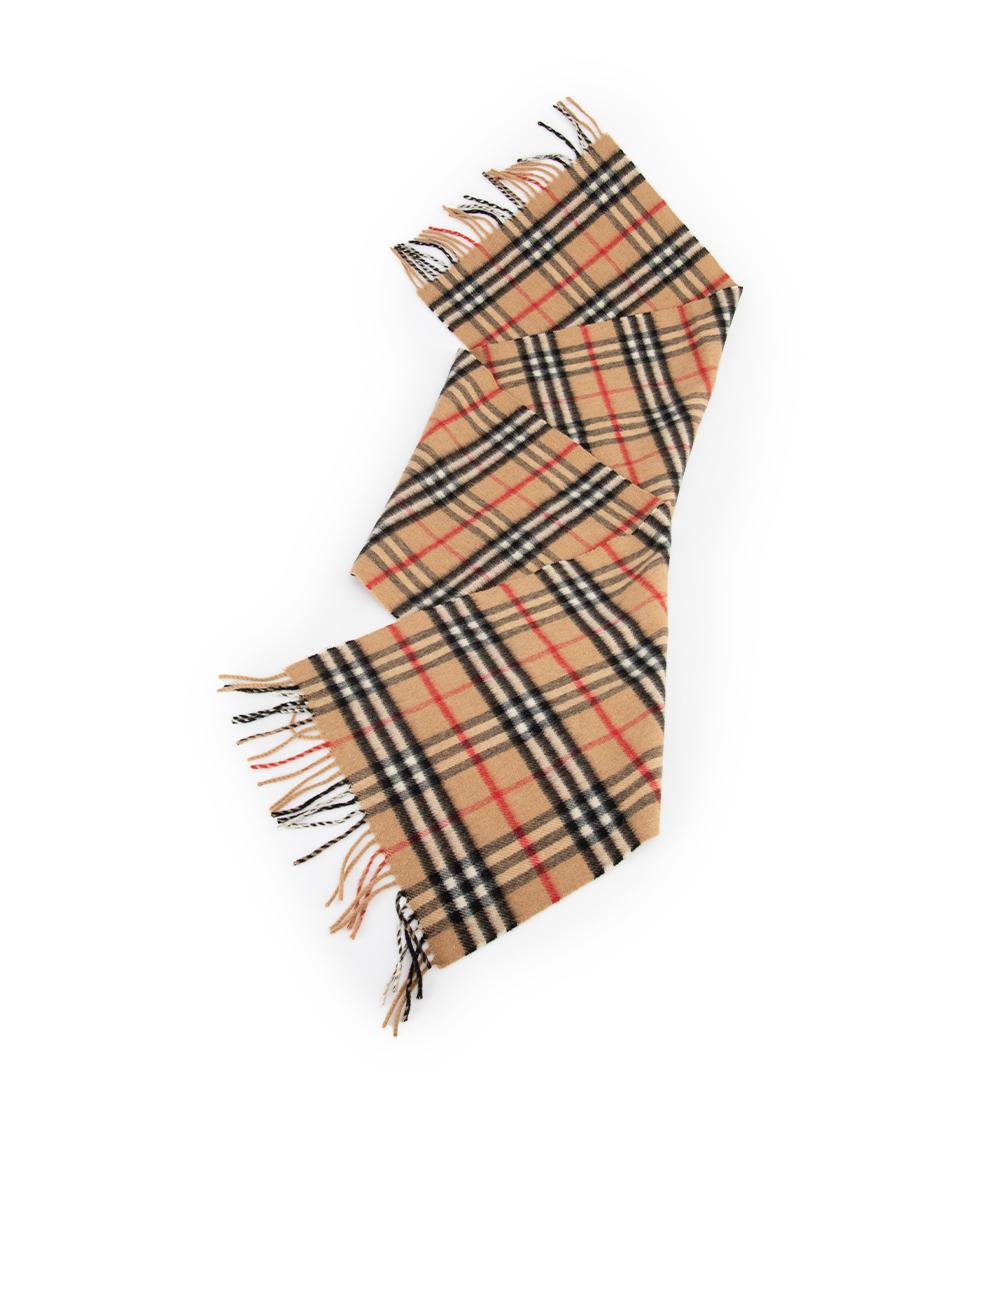 Burberry Beige Cashmere Nova Check Scarf In Excellent Condition For Sale In London, GB